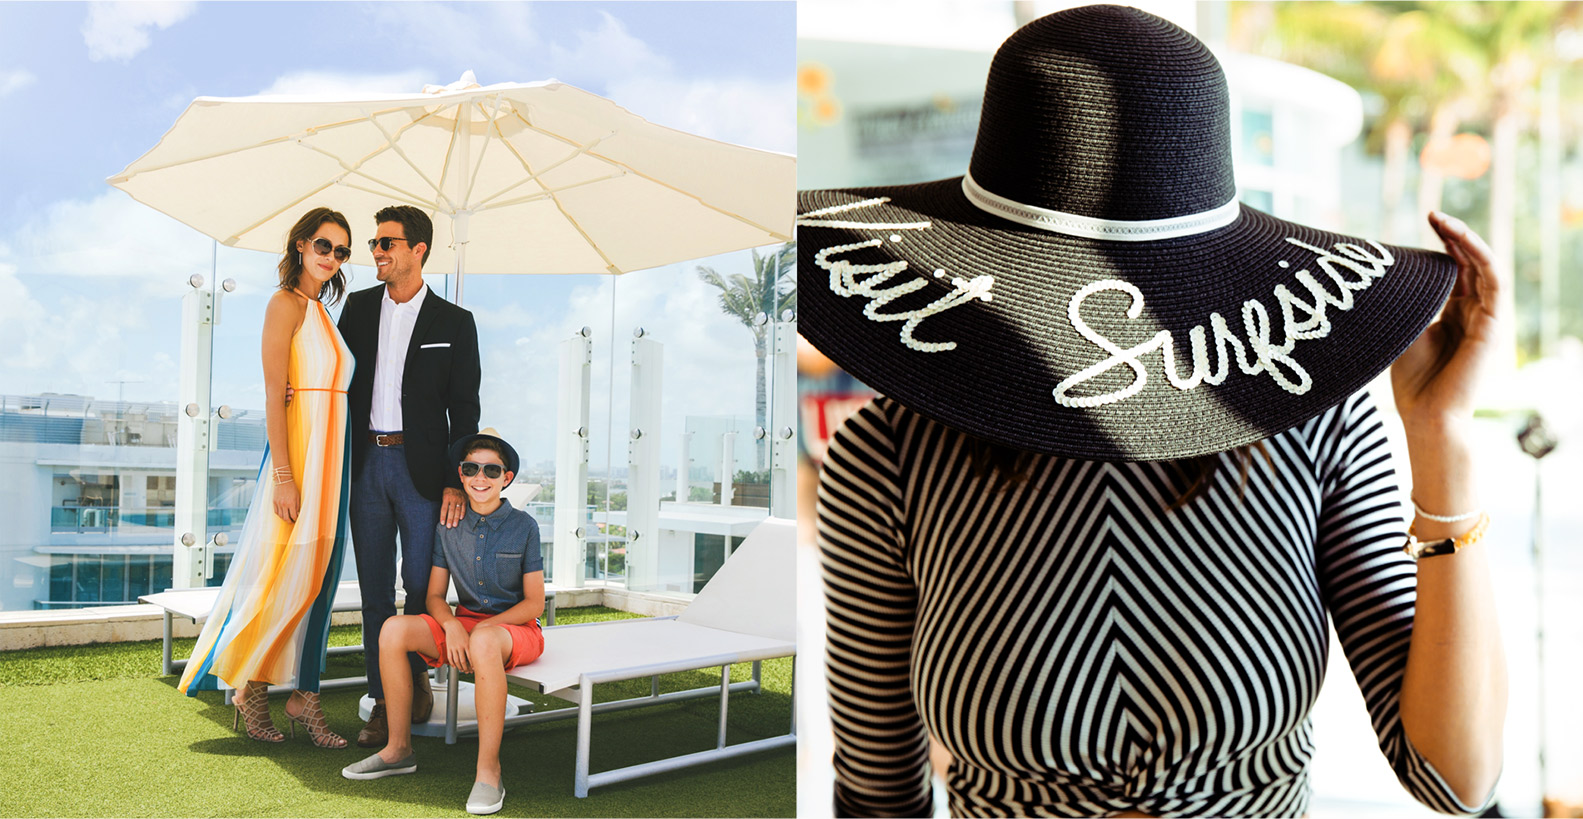 Jacober Creative Identity and Campaign for the Town of Surfside Florida - Photo Left: Family dressed up on a rooftop standing under an umbrella Photo Right: Woman wears a hat that reads "Visit Surfside" in cursive